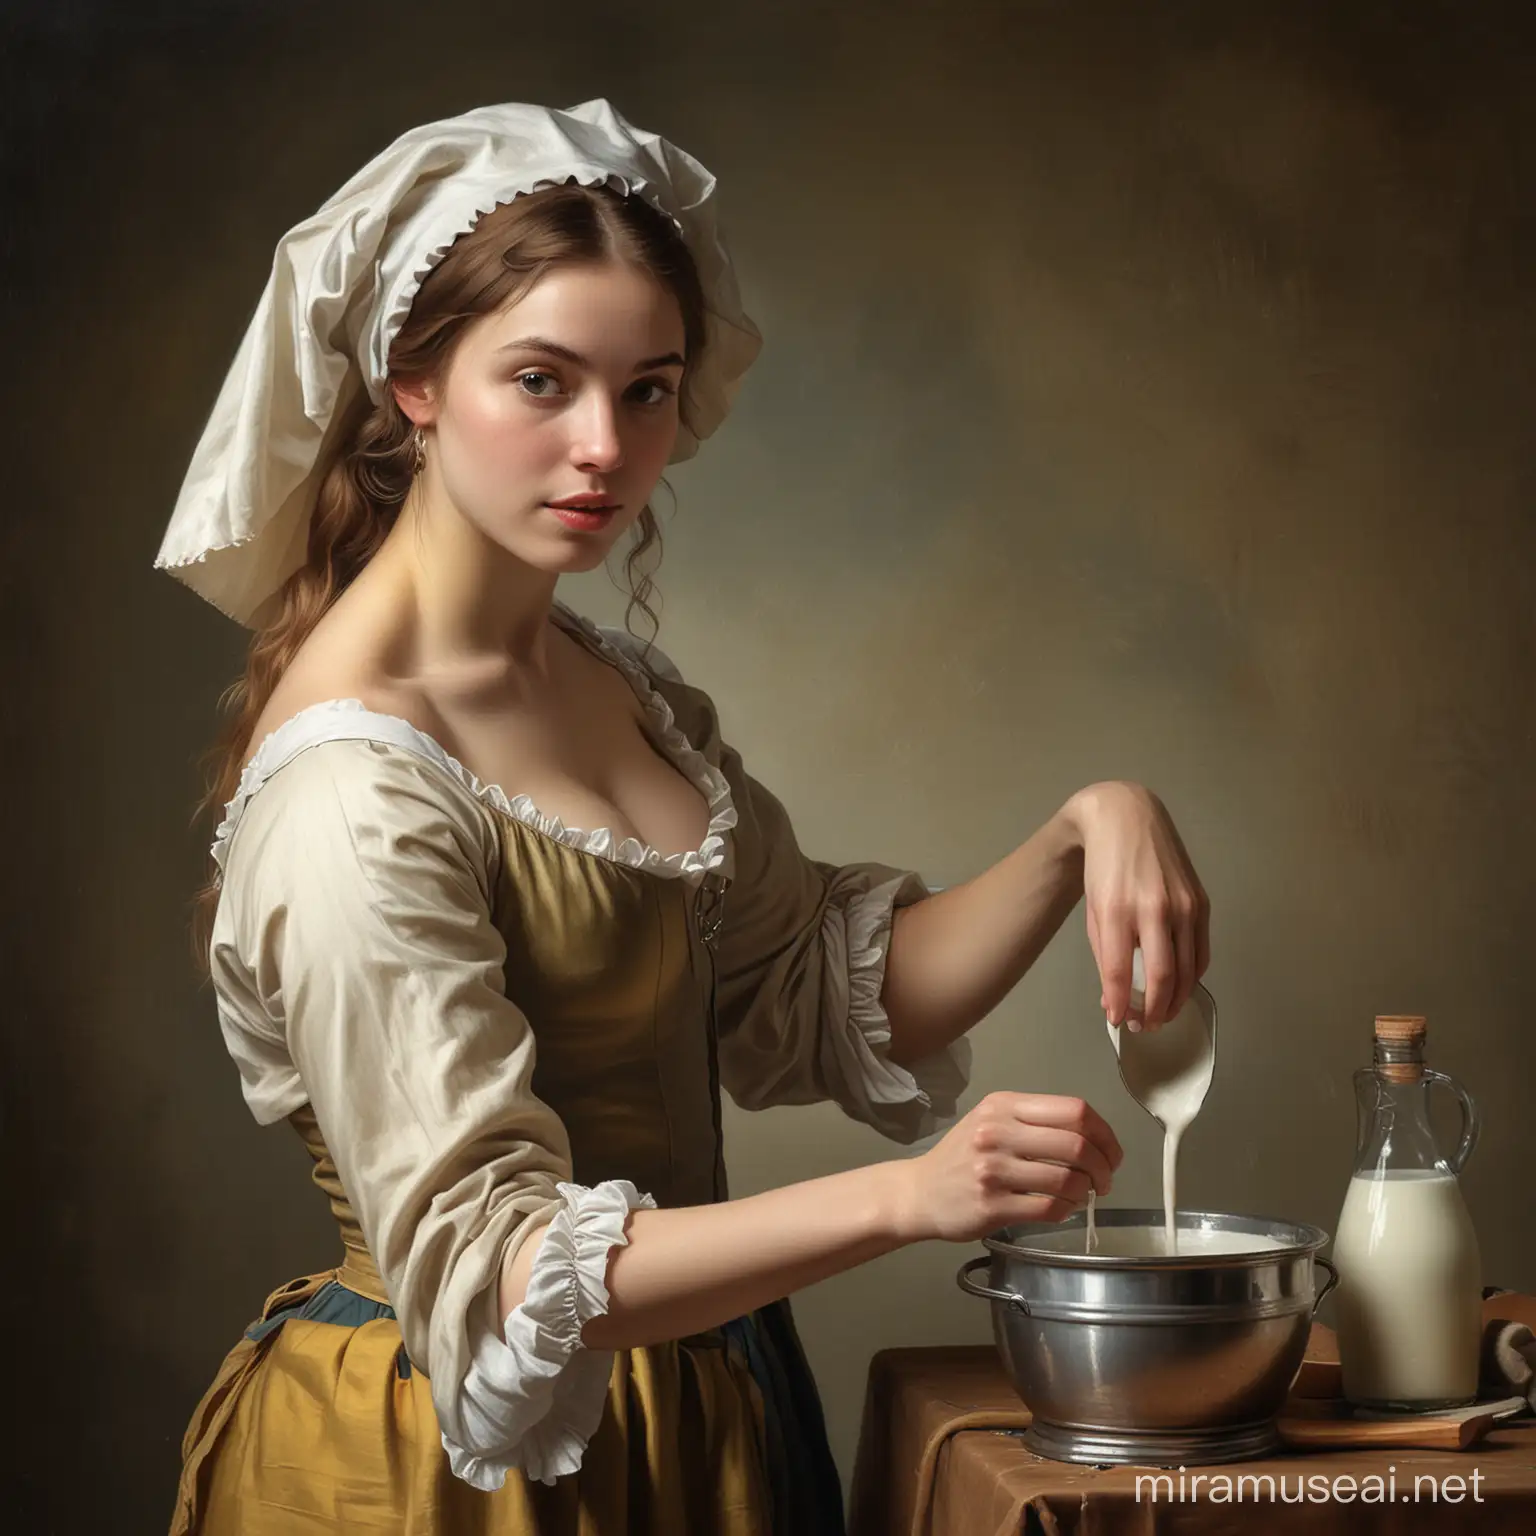 Nude oil painting of a young stunningly beautiful woman portrayed as the famous milk maid from Dutch painter Vermeer with the hair cap and pouring the milk. Wide angle shot. In the style of Elisabeth Vigee Le Brun.